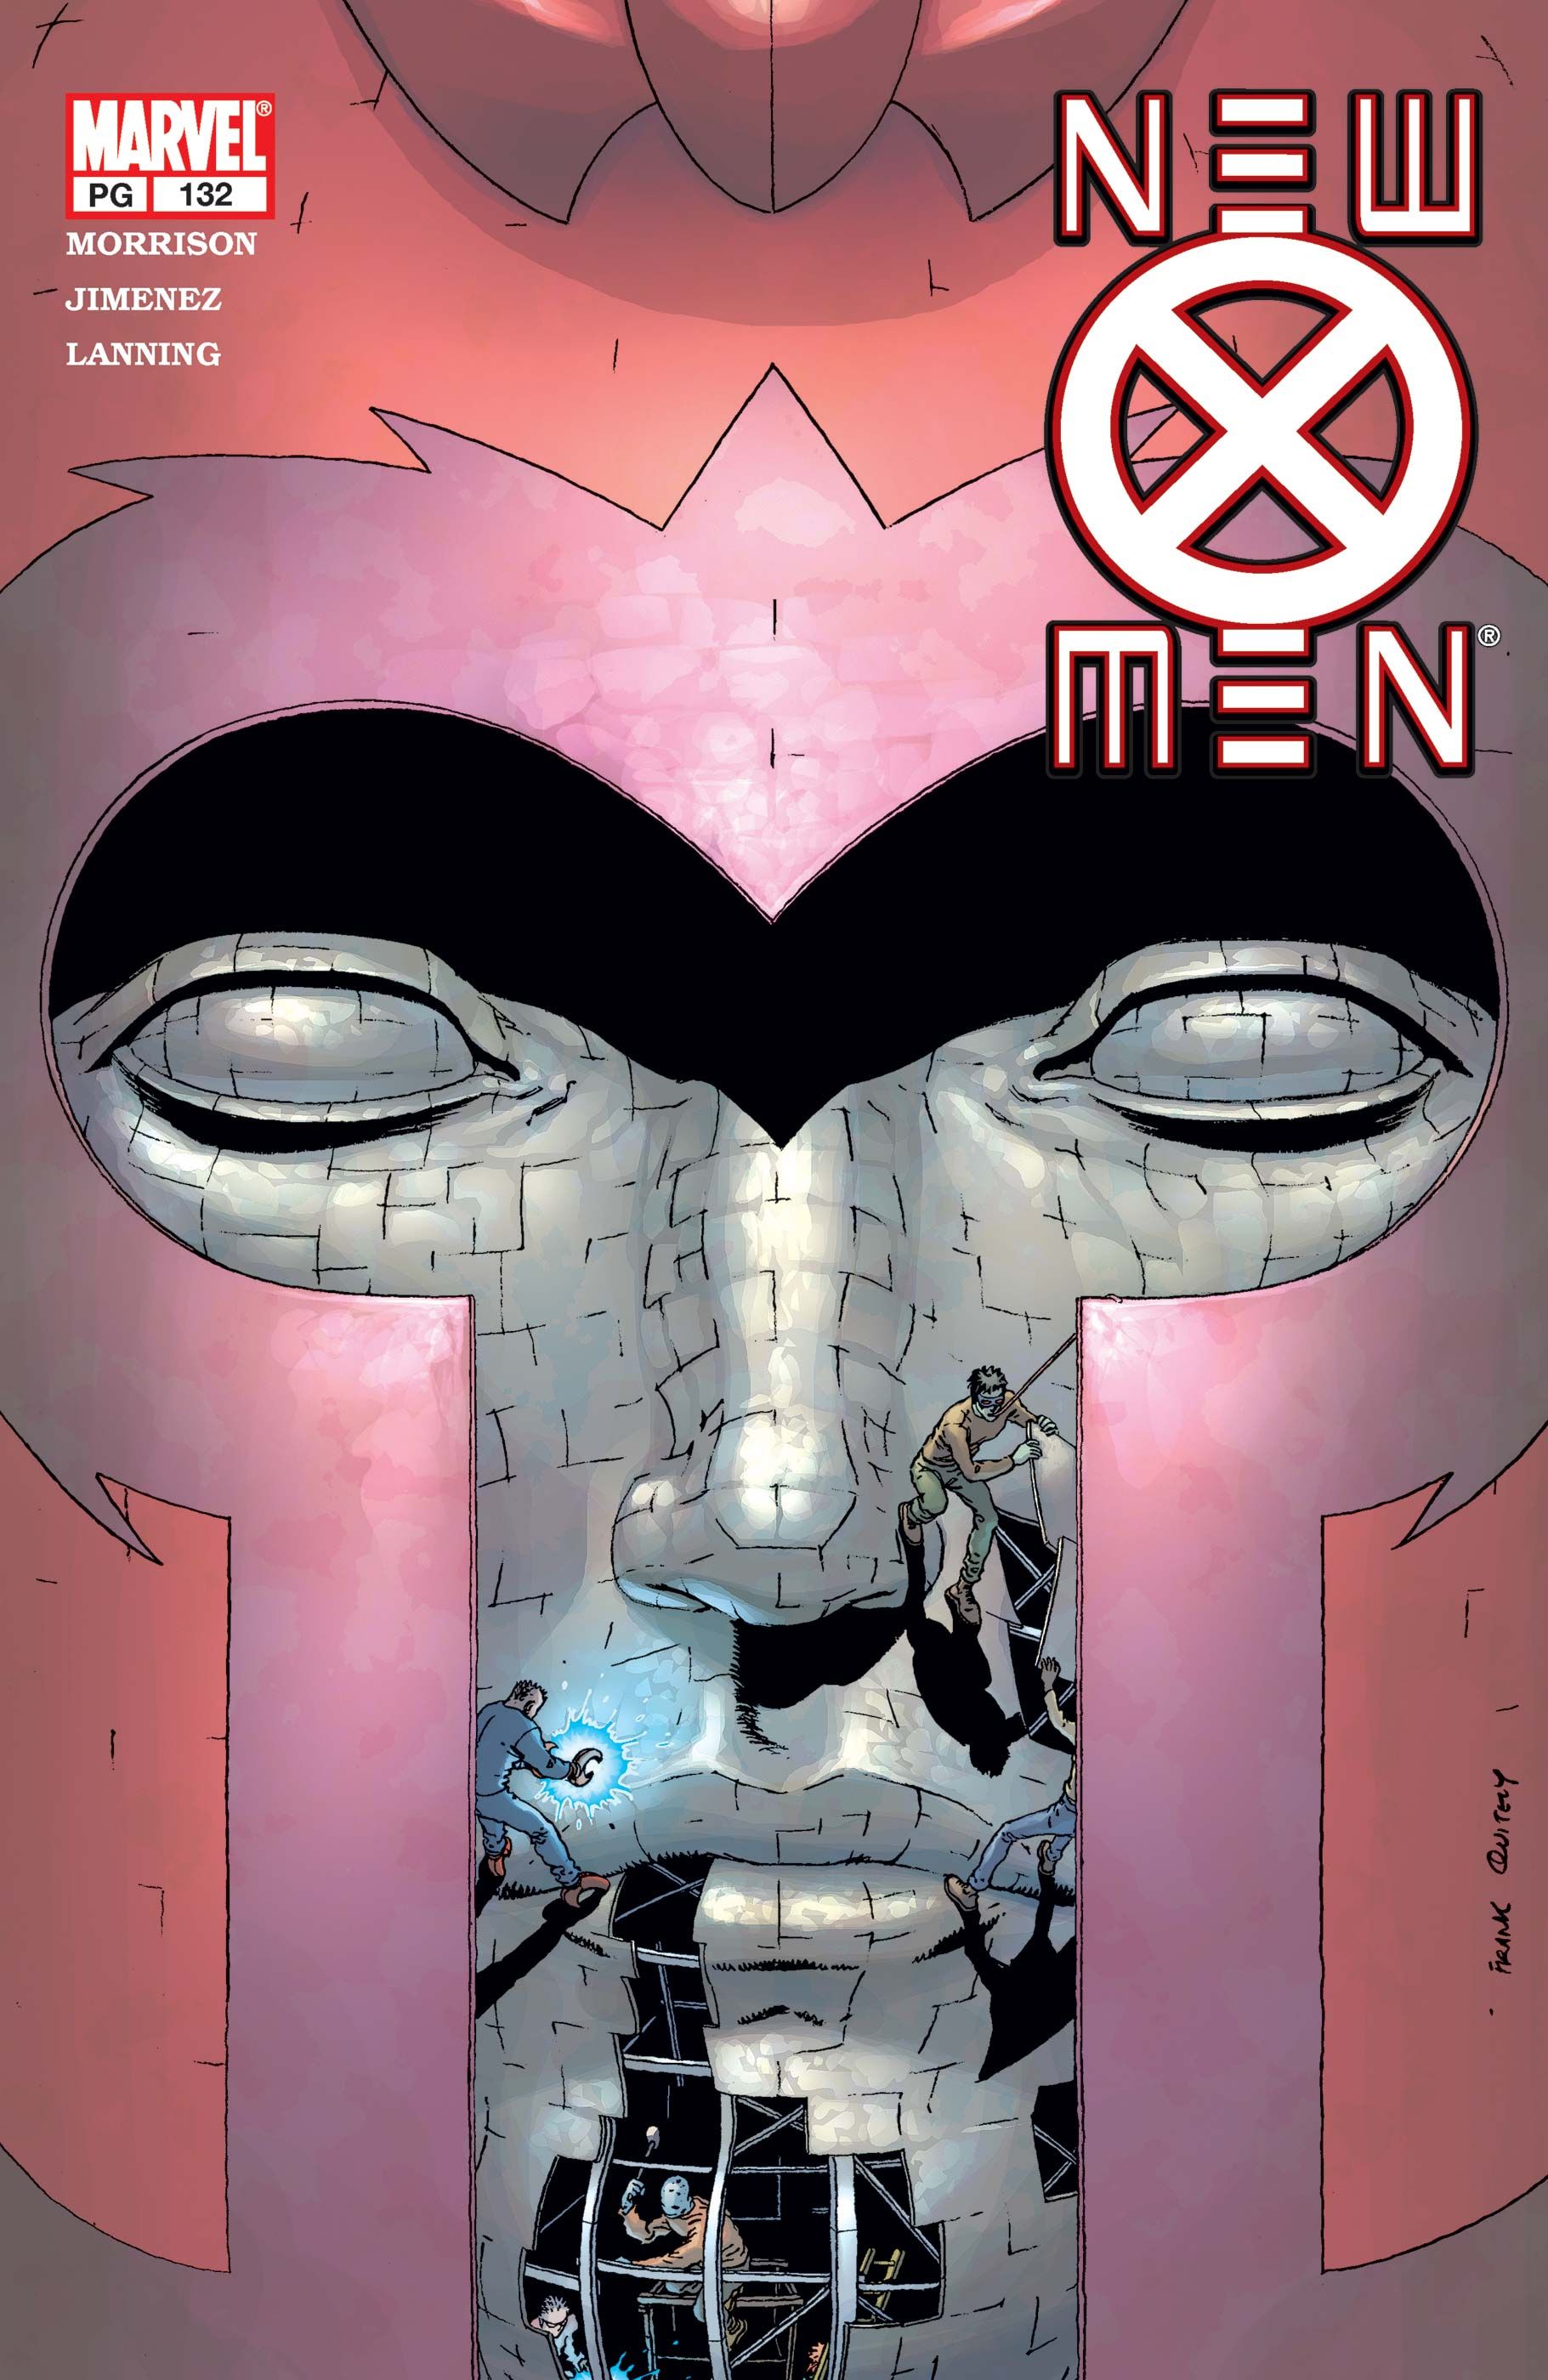 A statue of Magneto on Frank Quitely's cover to New X-Men #132